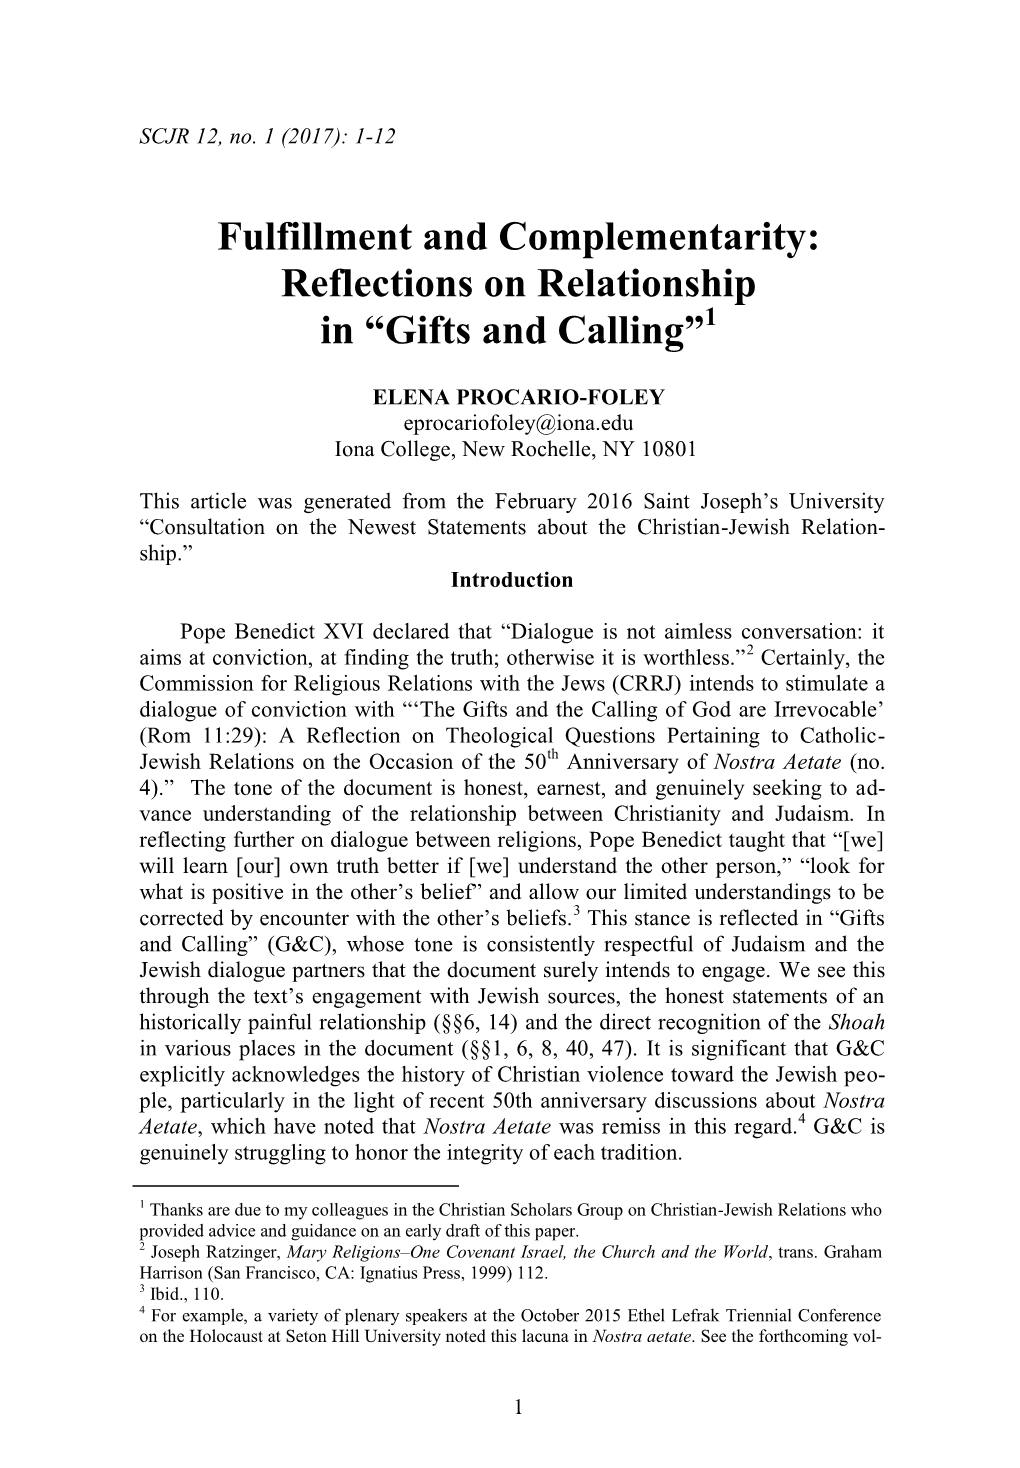 Fulfillment and Complementarity: Reflections on Relationship in “Gifts and Calling”1